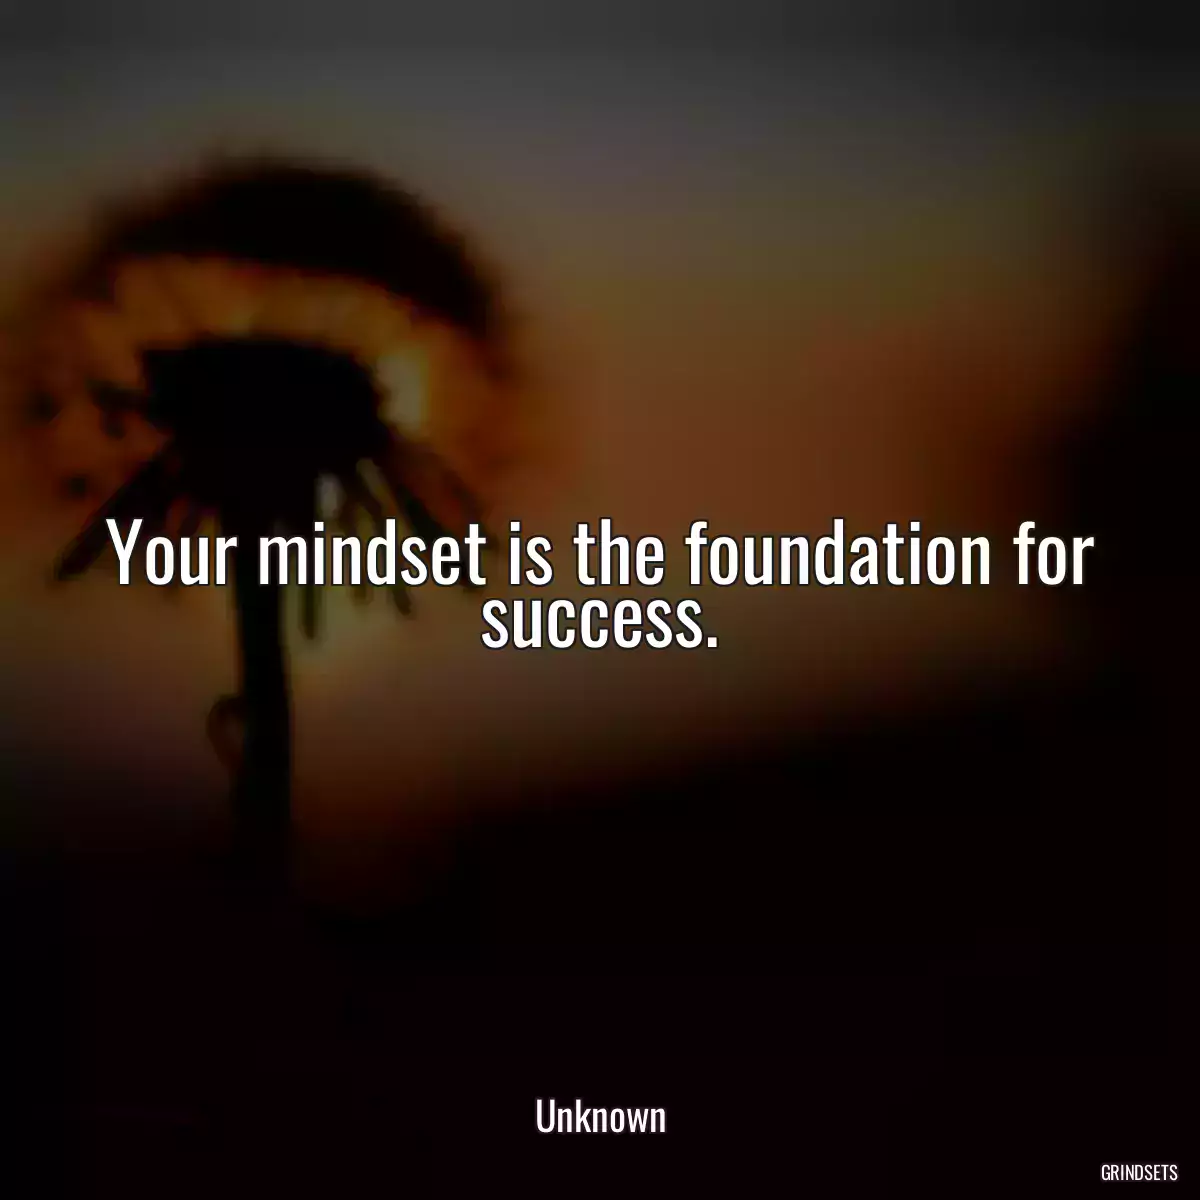 Your mindset is the foundation for success.